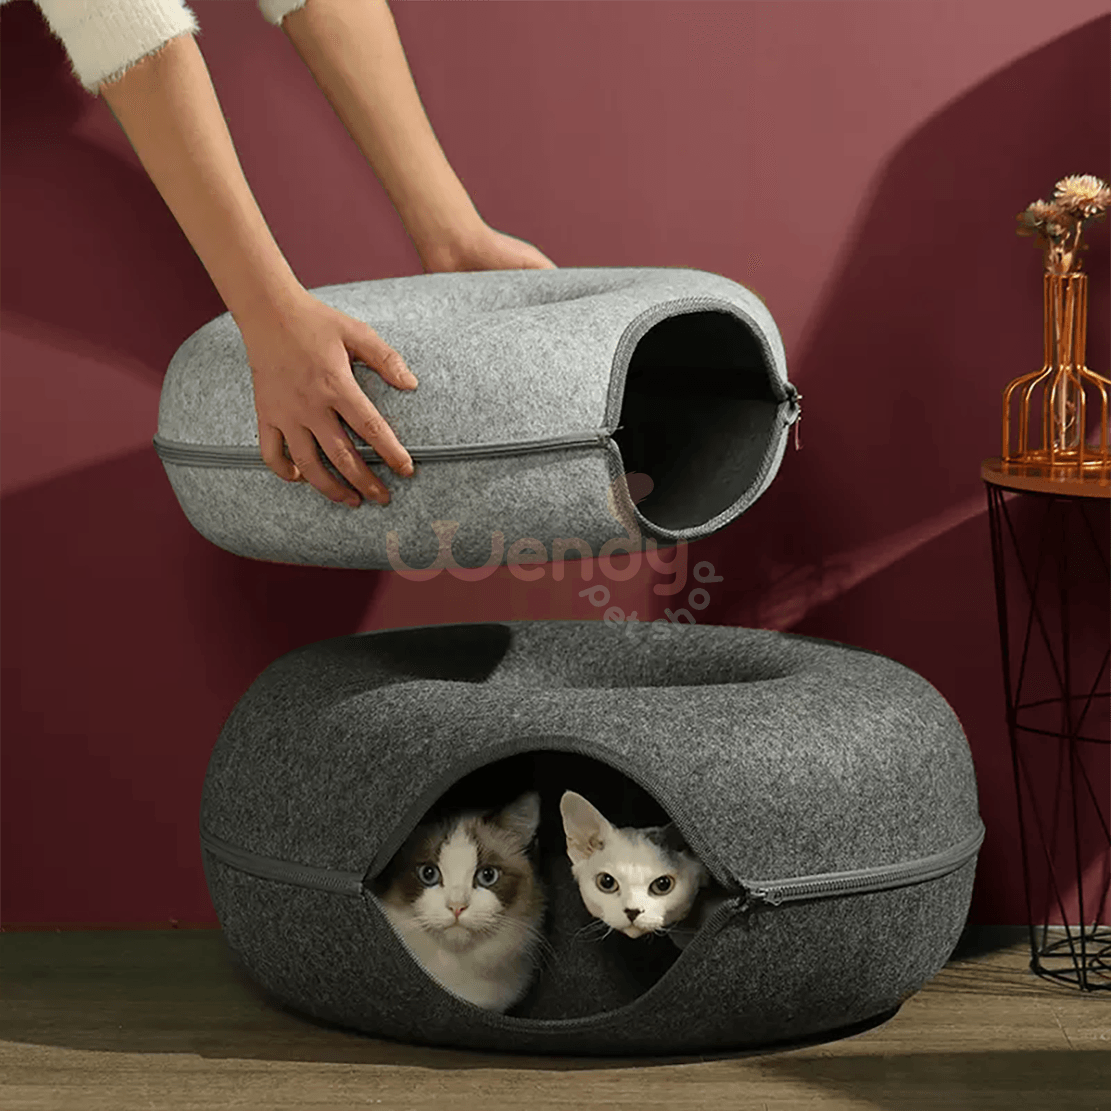 2X "Hide-and-seek" Wendy Cat Tunnel Bed